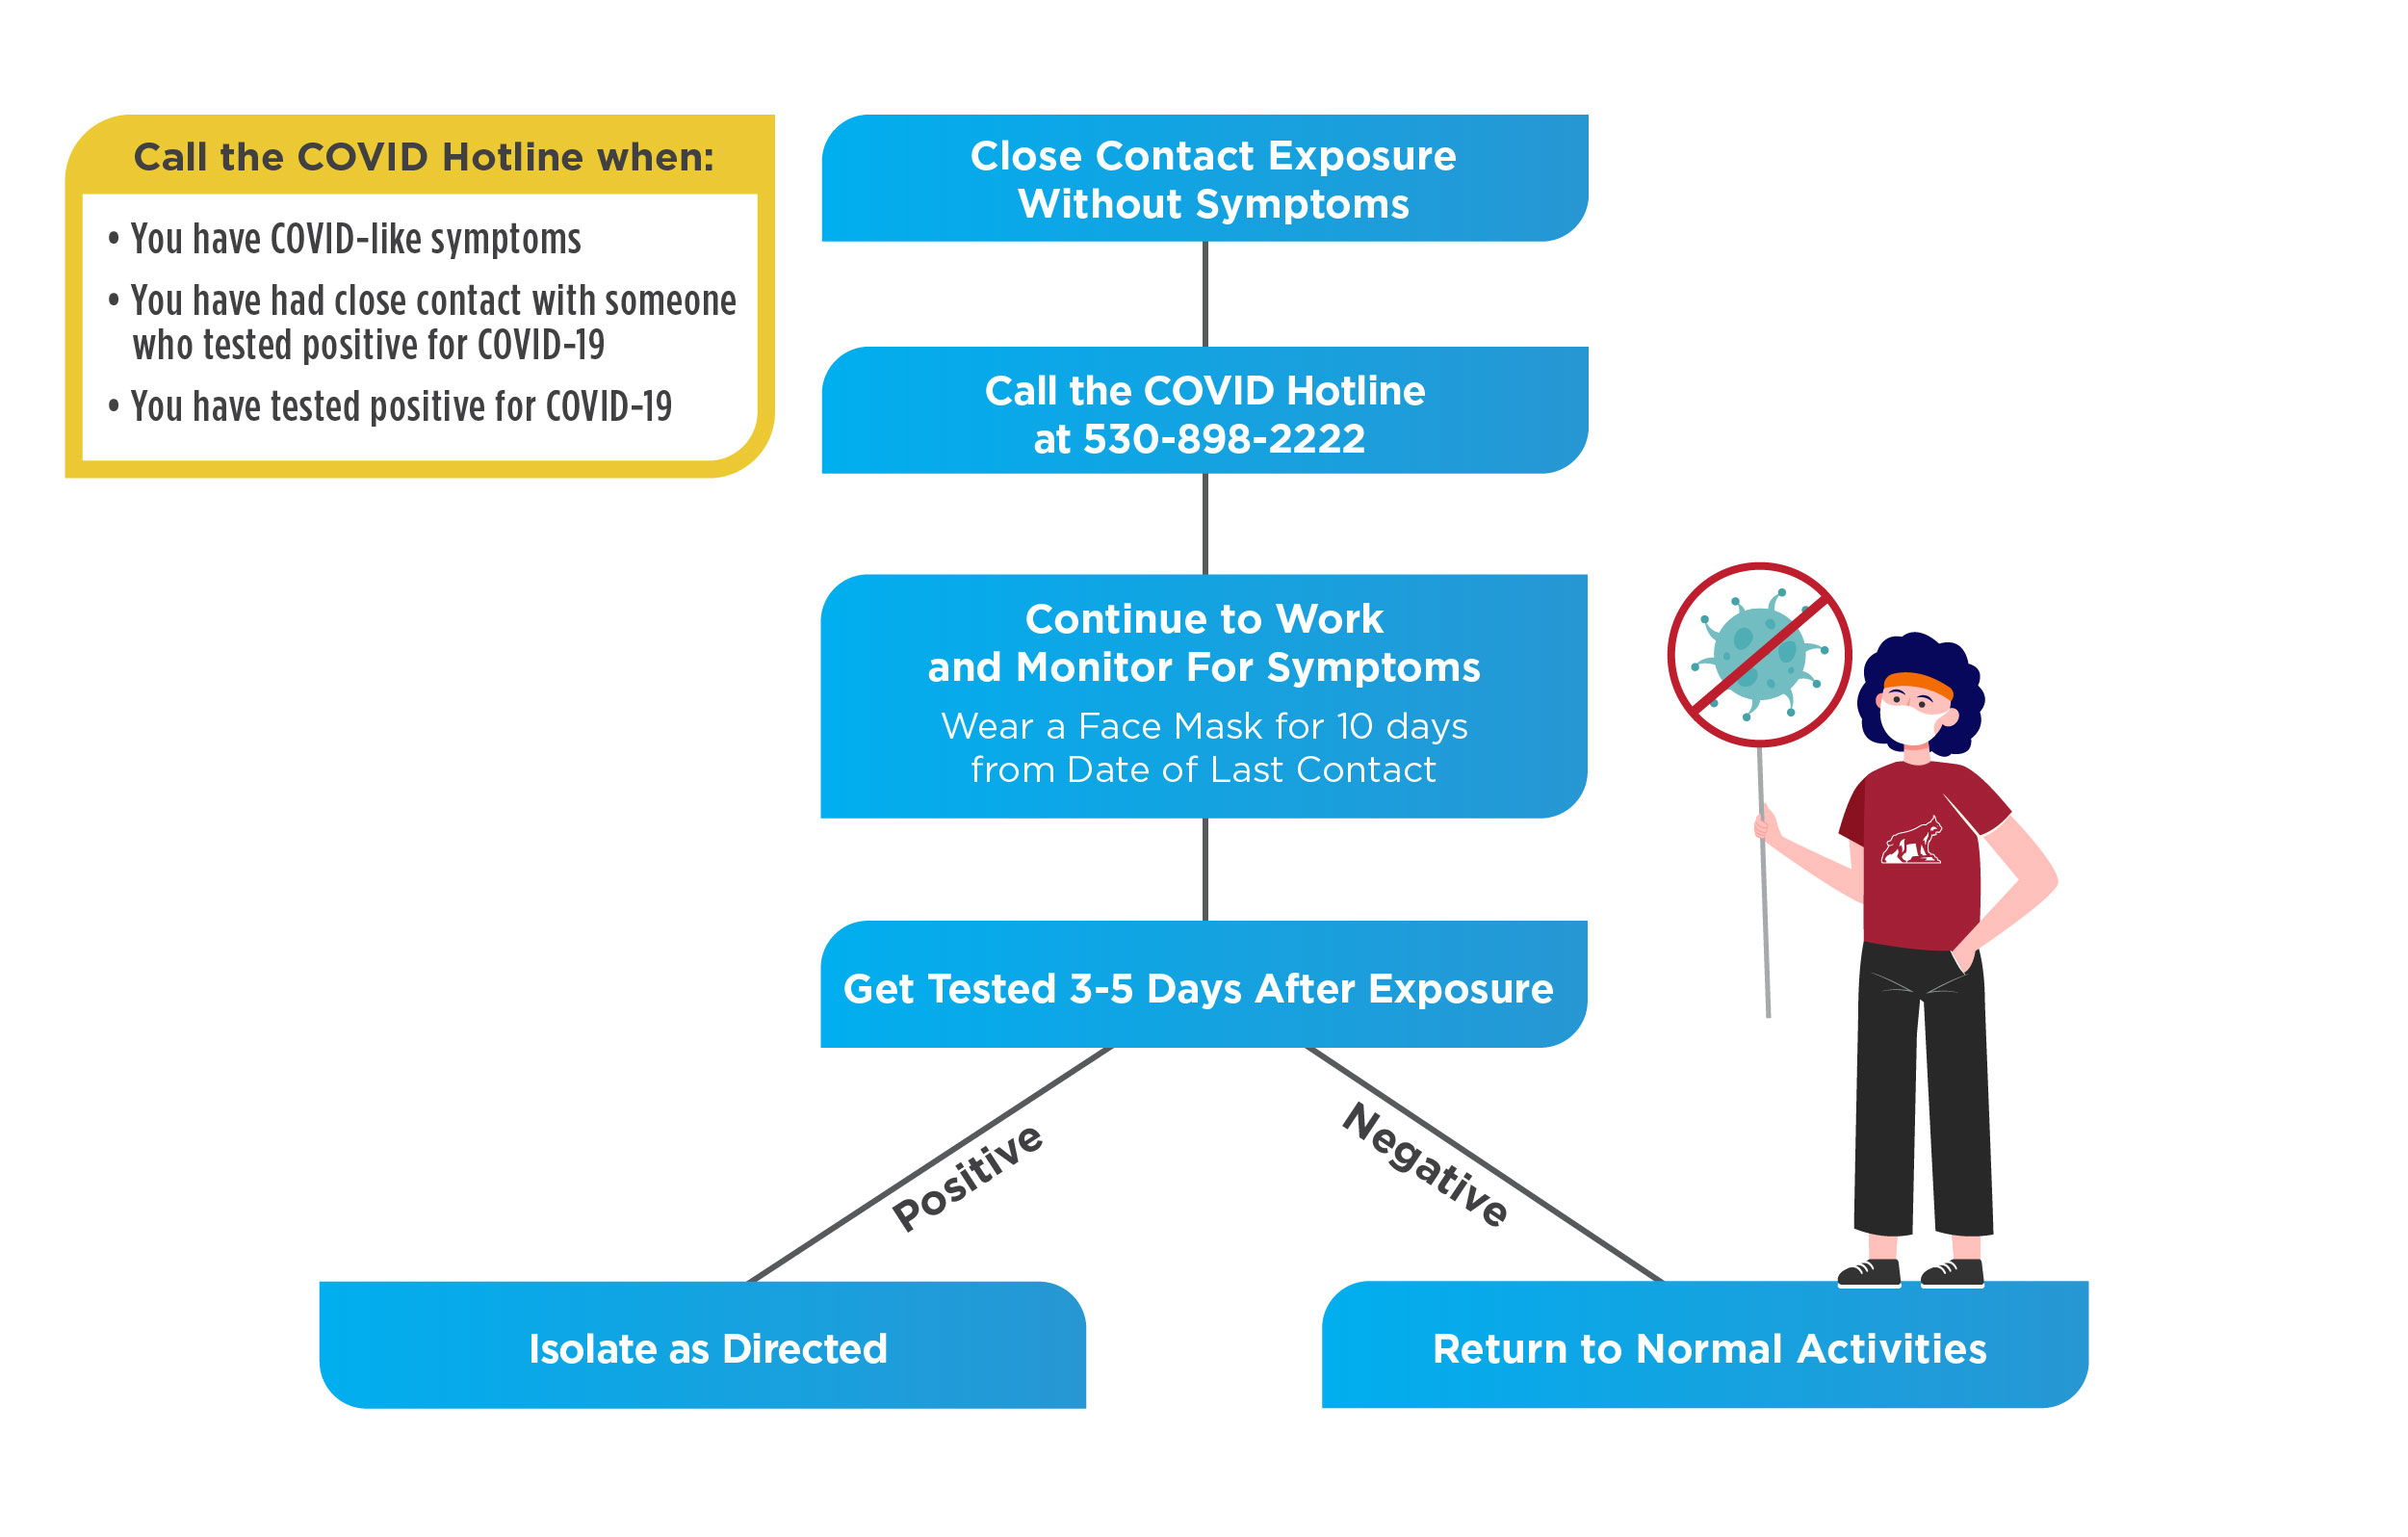 Flowchart showing how to respond if you have close contact but no symptoms. Full text in the link Text description of "Close Contact Exposure Without Symptoms" flowchart